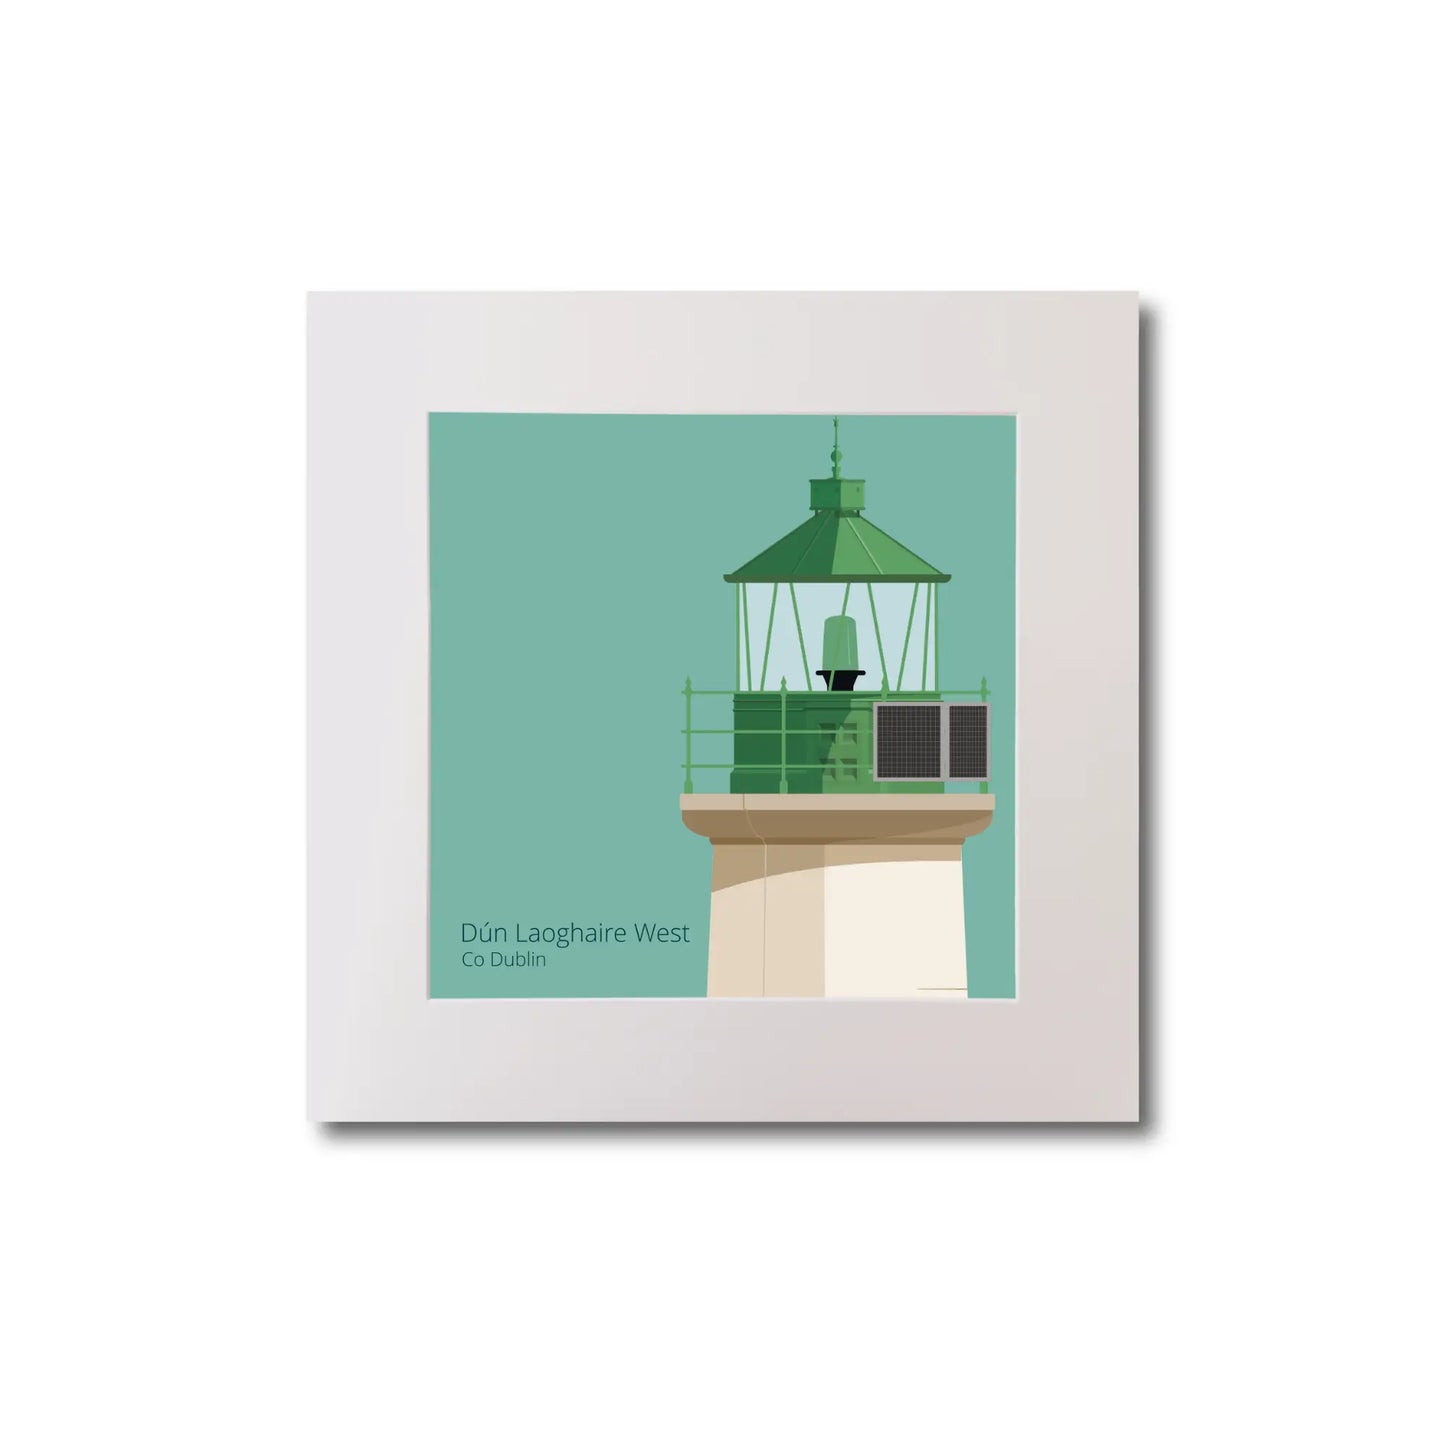 Illustration of Dún Laoghaire West lighthouse on an ocean green background, mounted and measuring 20x20cm.